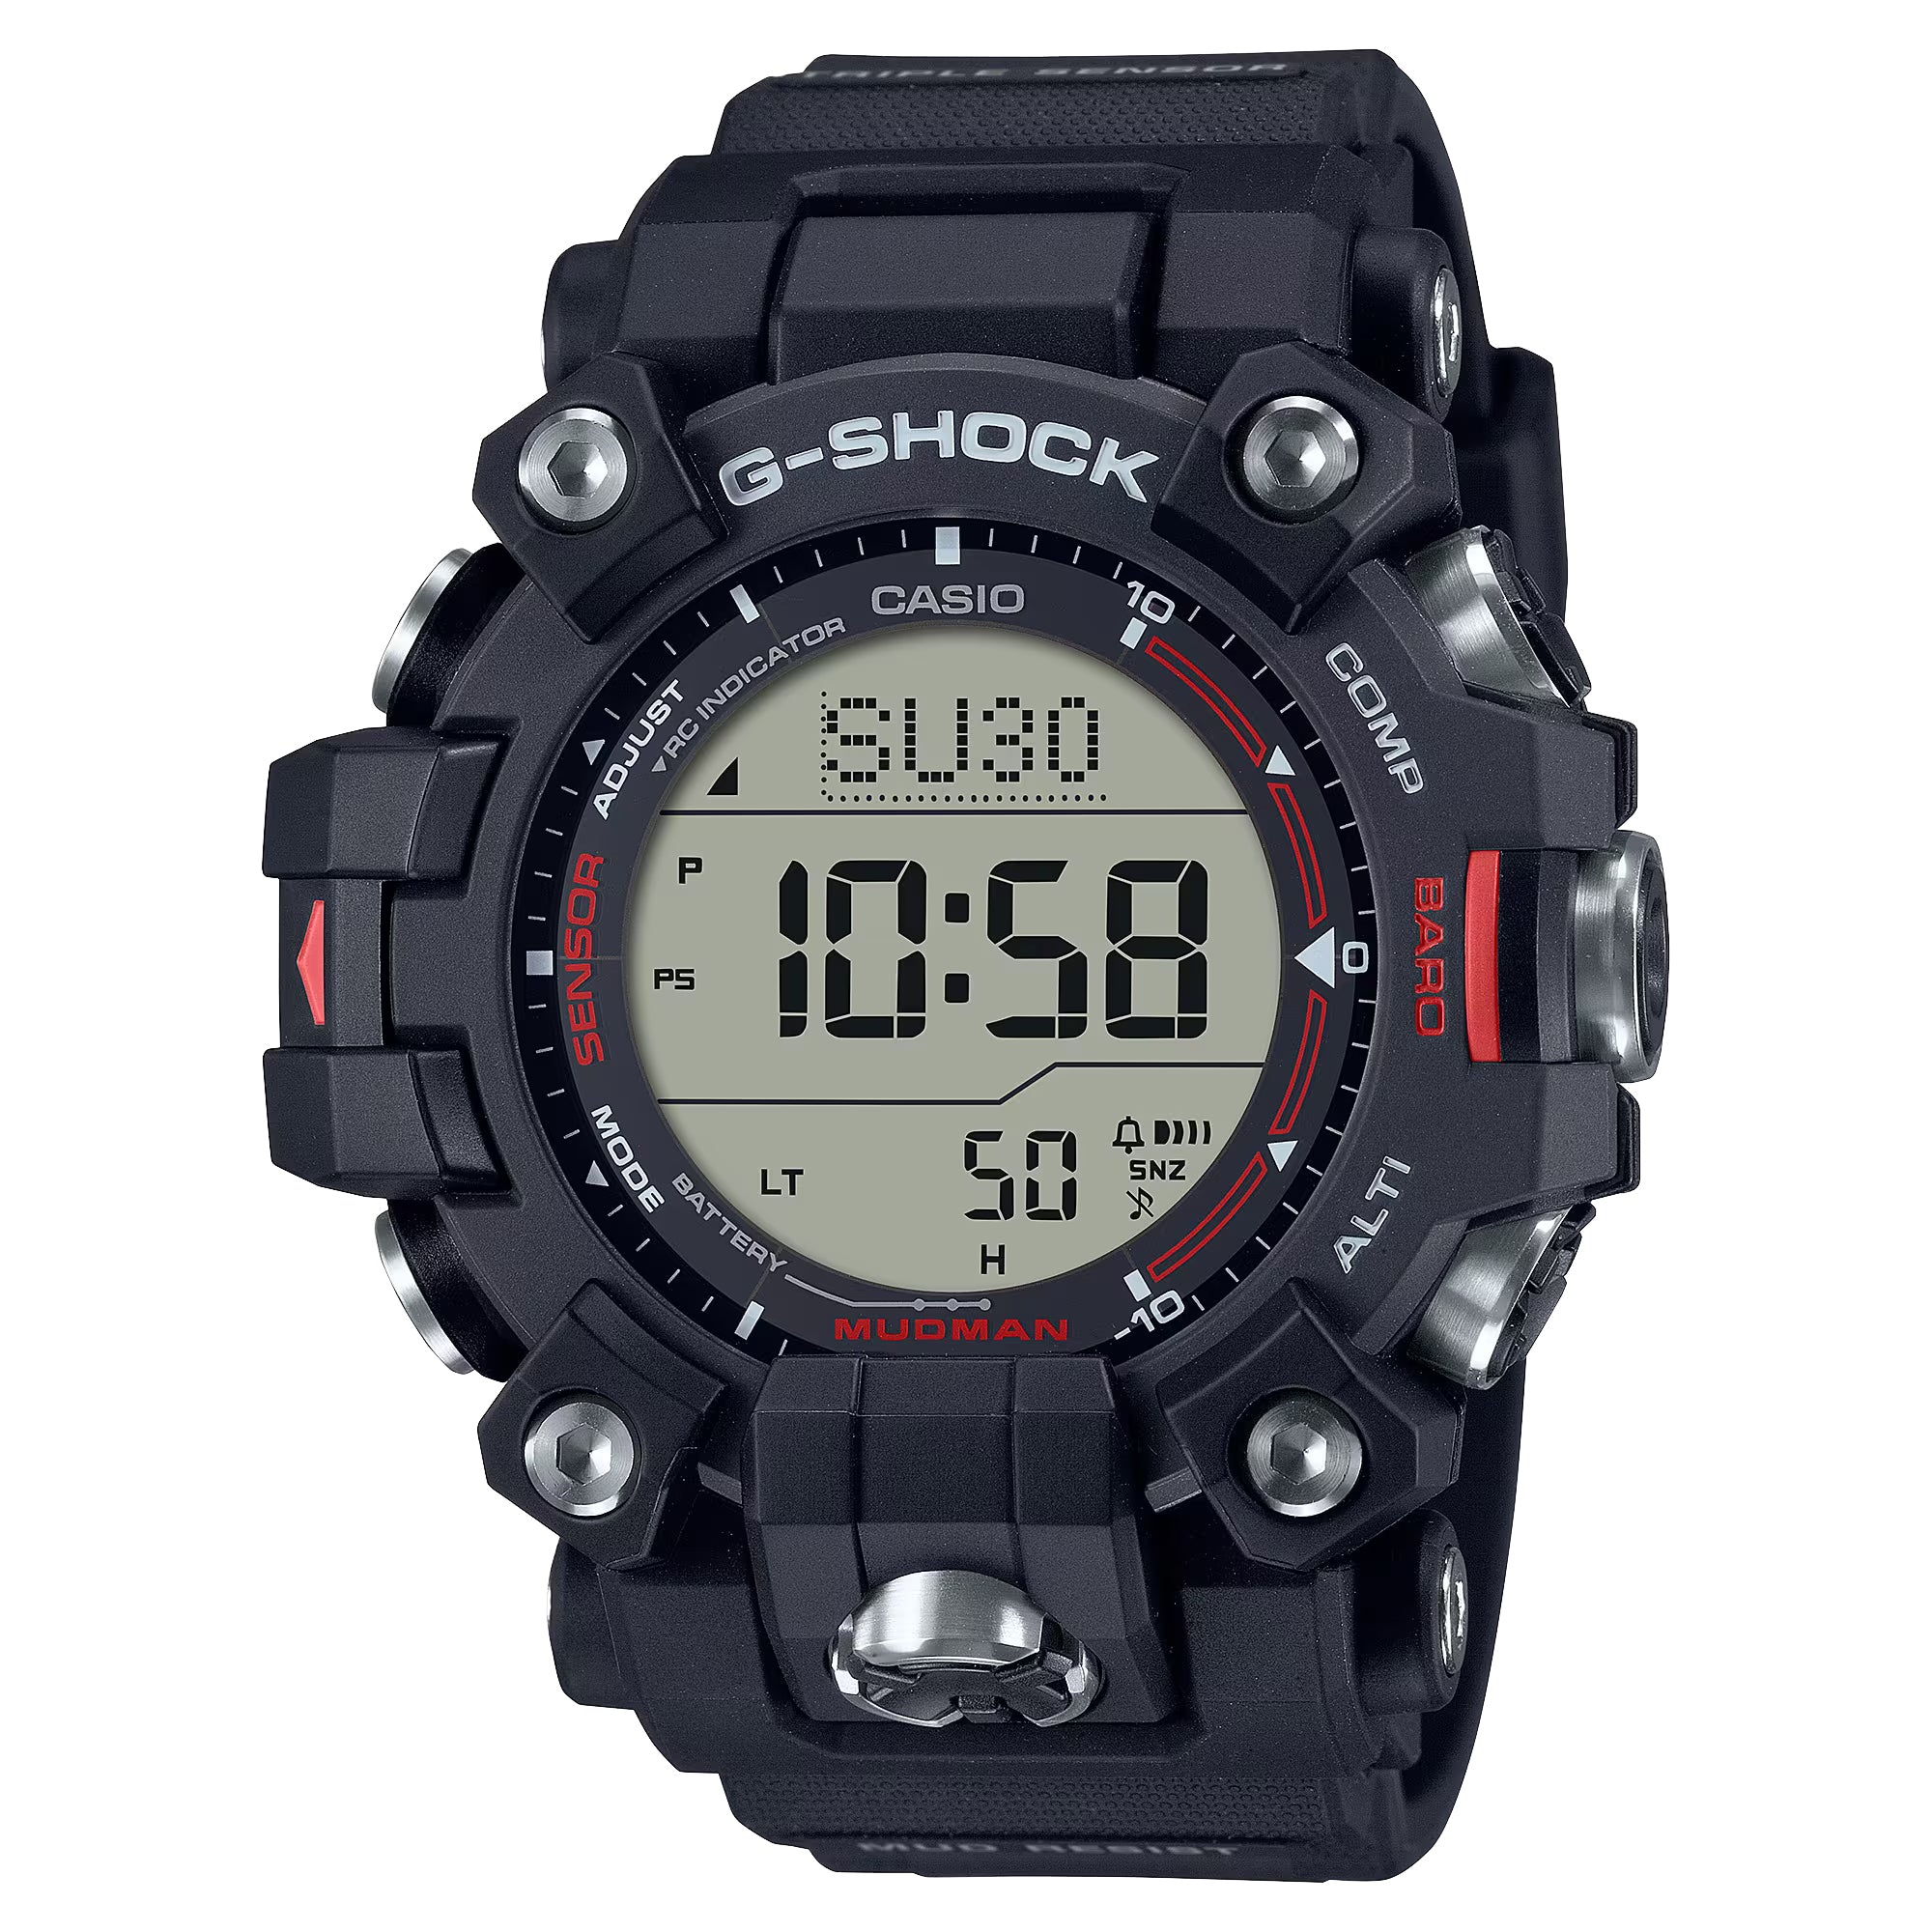 GPRB1000 Watches Collection, G-SHOCK